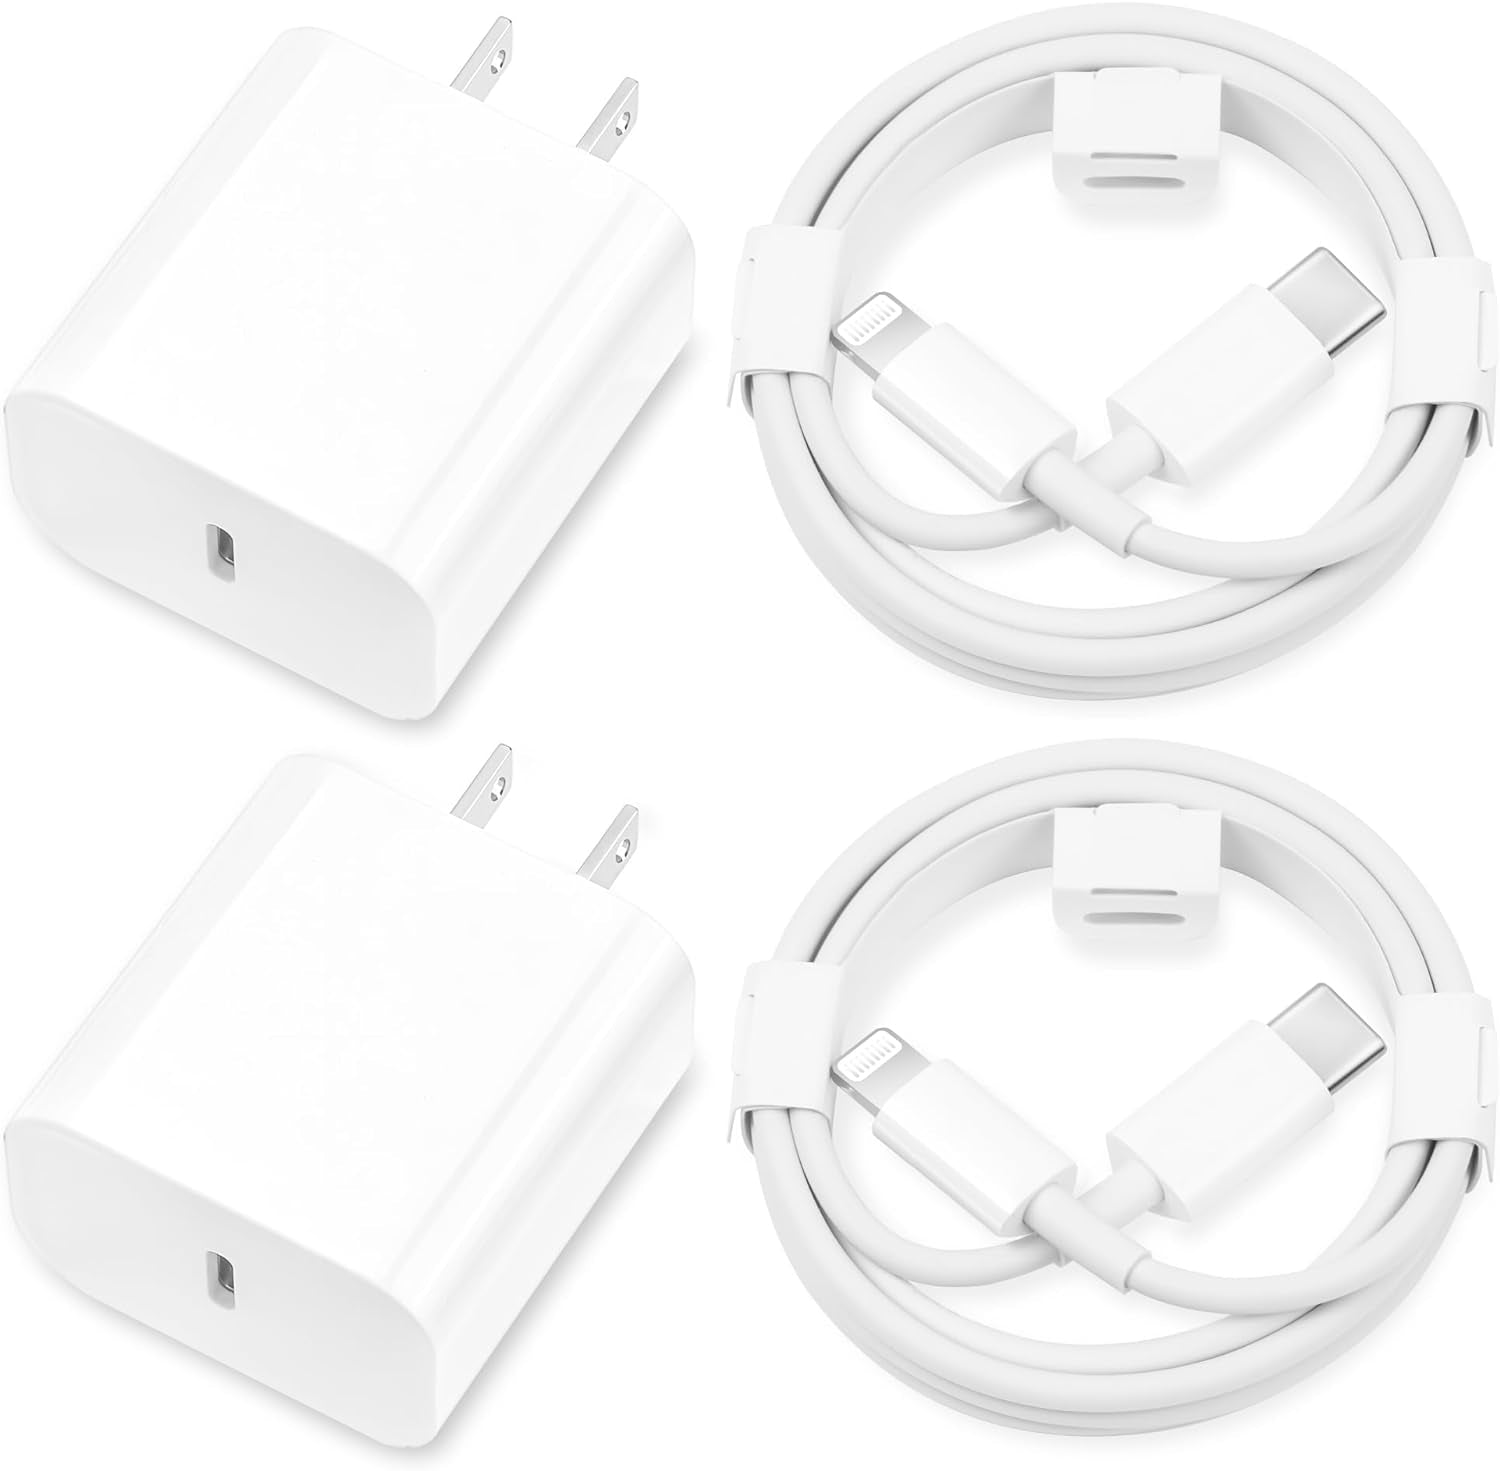 I.Phone Charger Fast Charging,[Mfi Certified] 2Pack 20W Type C Fast Charger Block with 6FT USB C Charger Cable Compatible for I.Phone 14/13/12/11 Pro Max/11/Xs Max/Xr/X,I.Pad,Airpods Pro